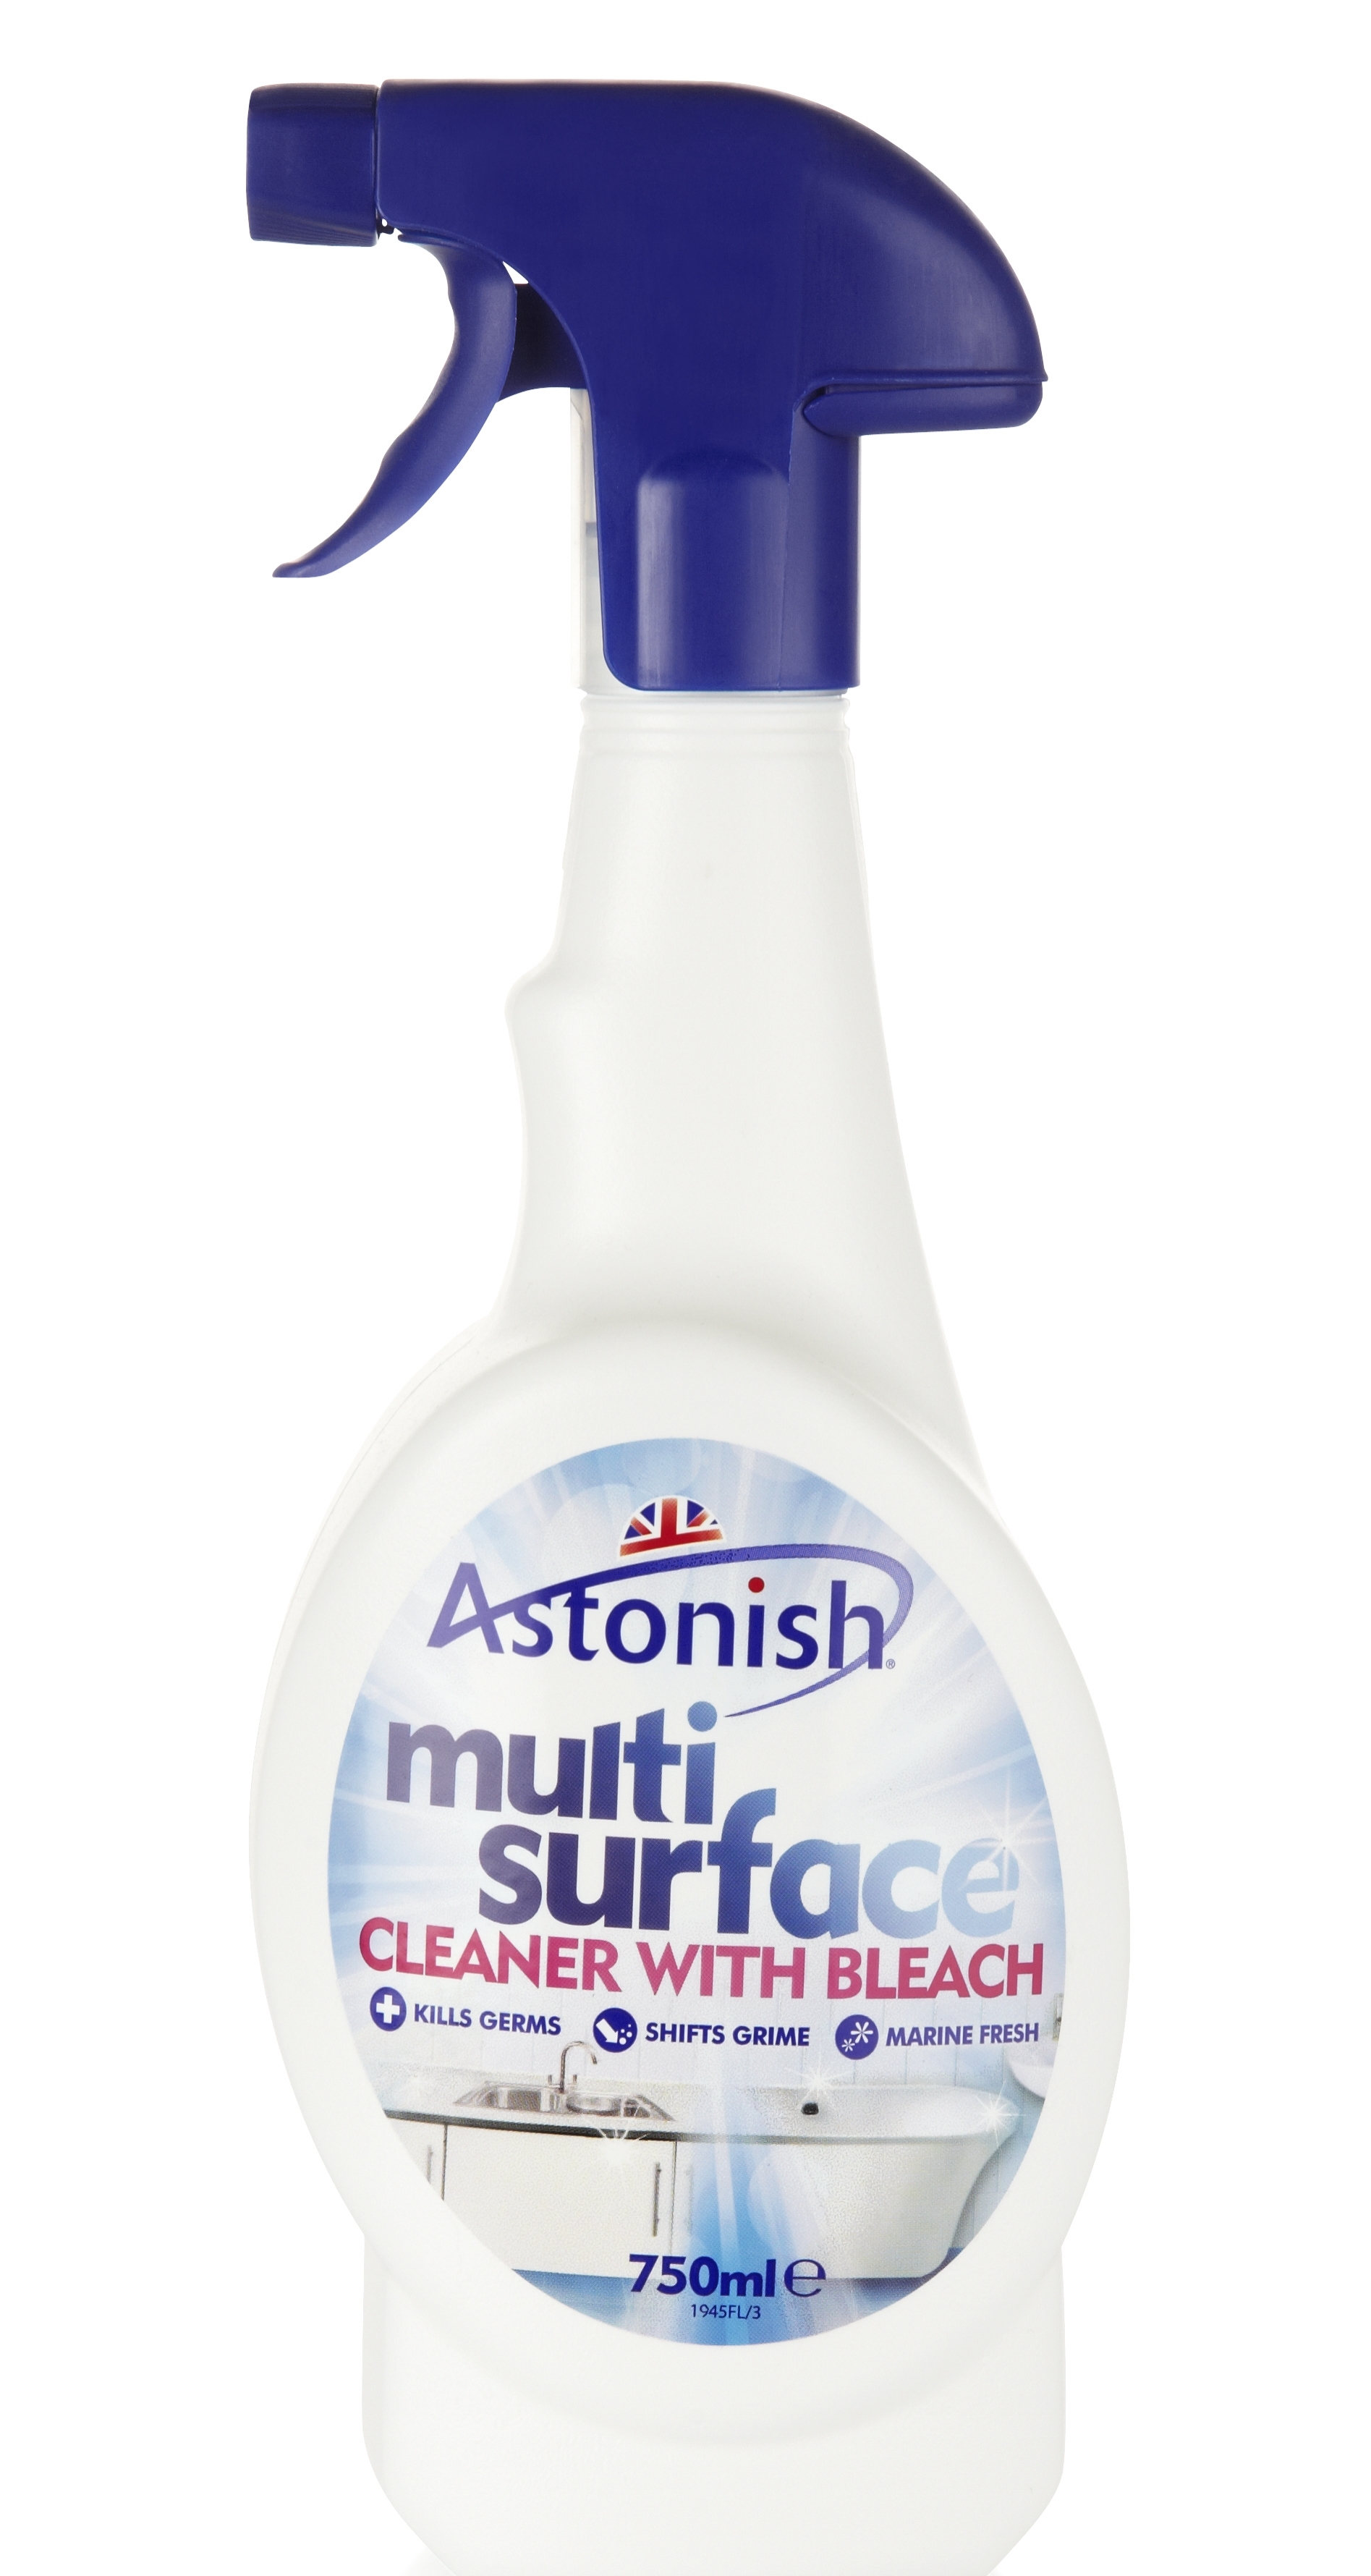 Astonish Multi Surface Cleaner with Bleach 750ml.JPG